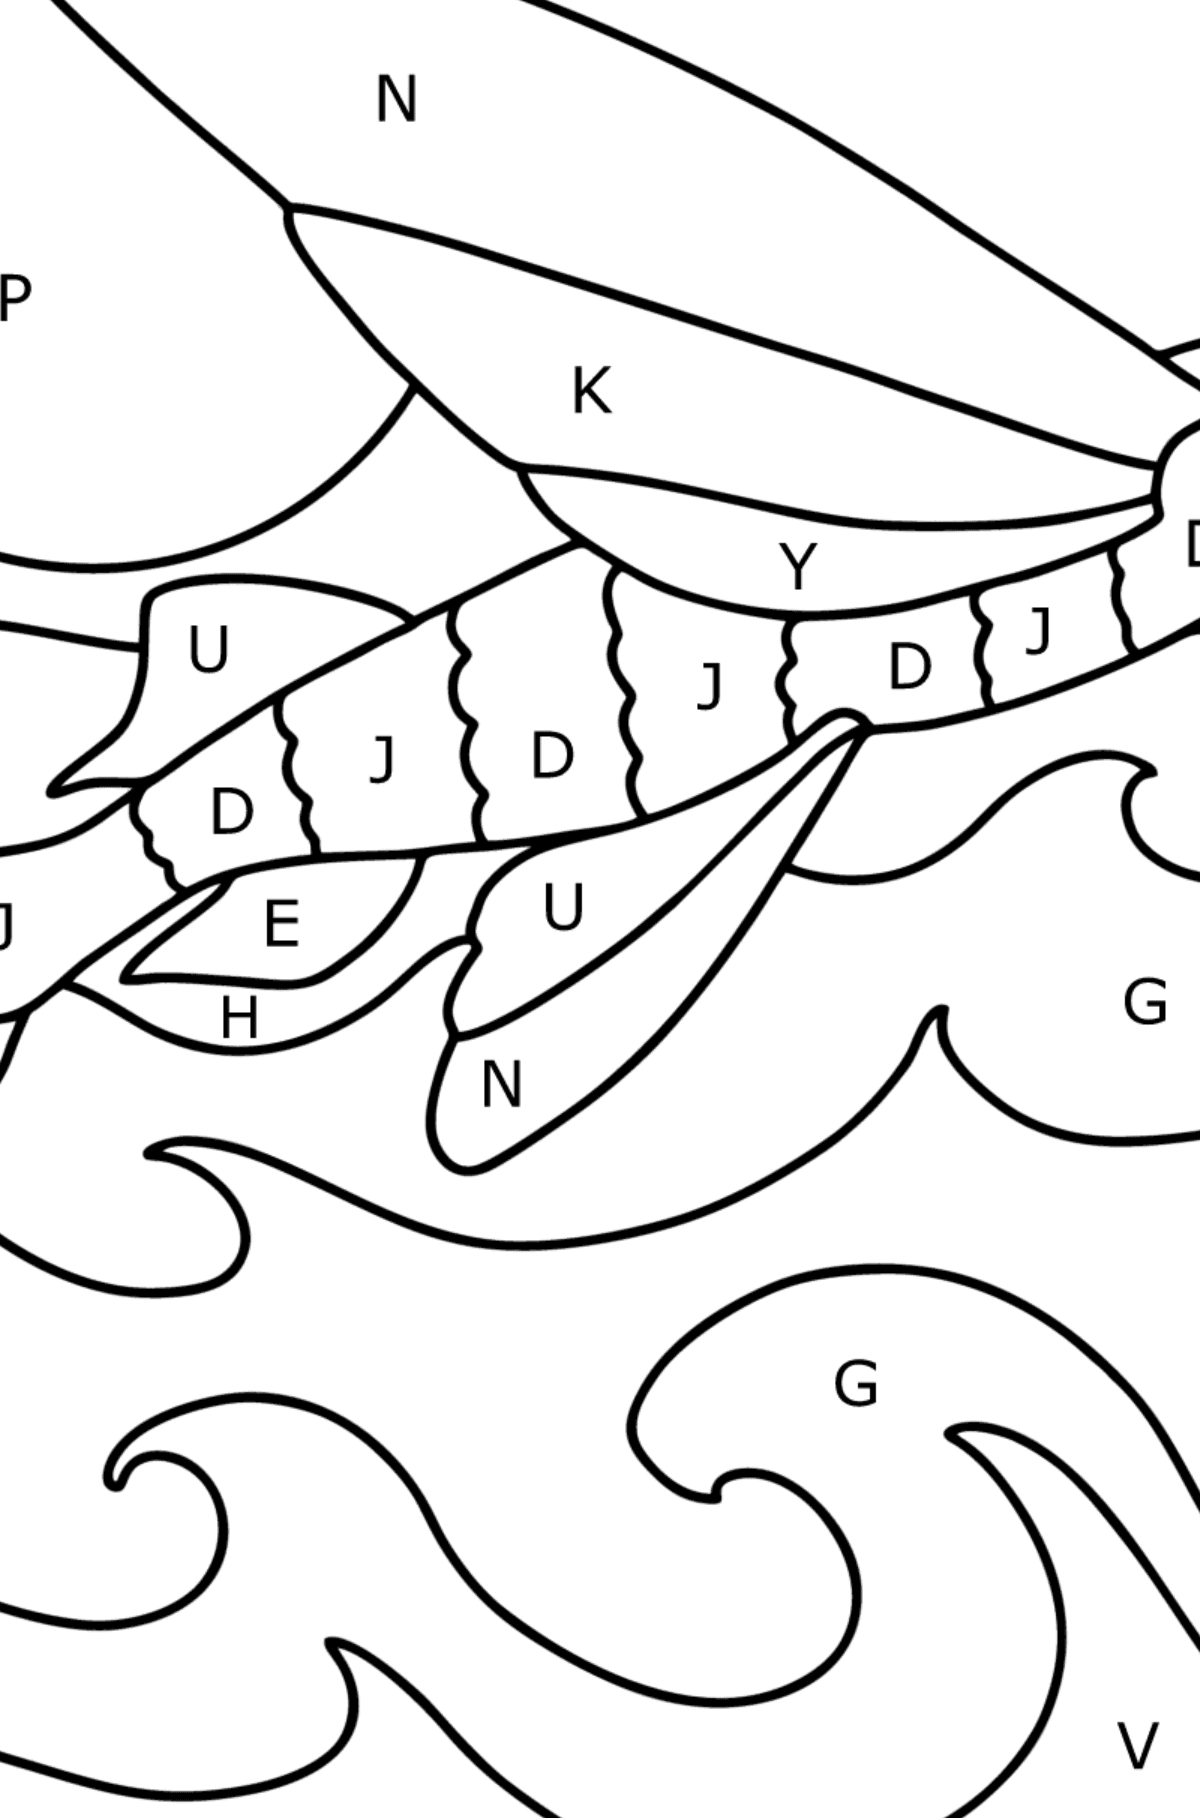 Flying fish coloring page - Coloring by Letters for Kids